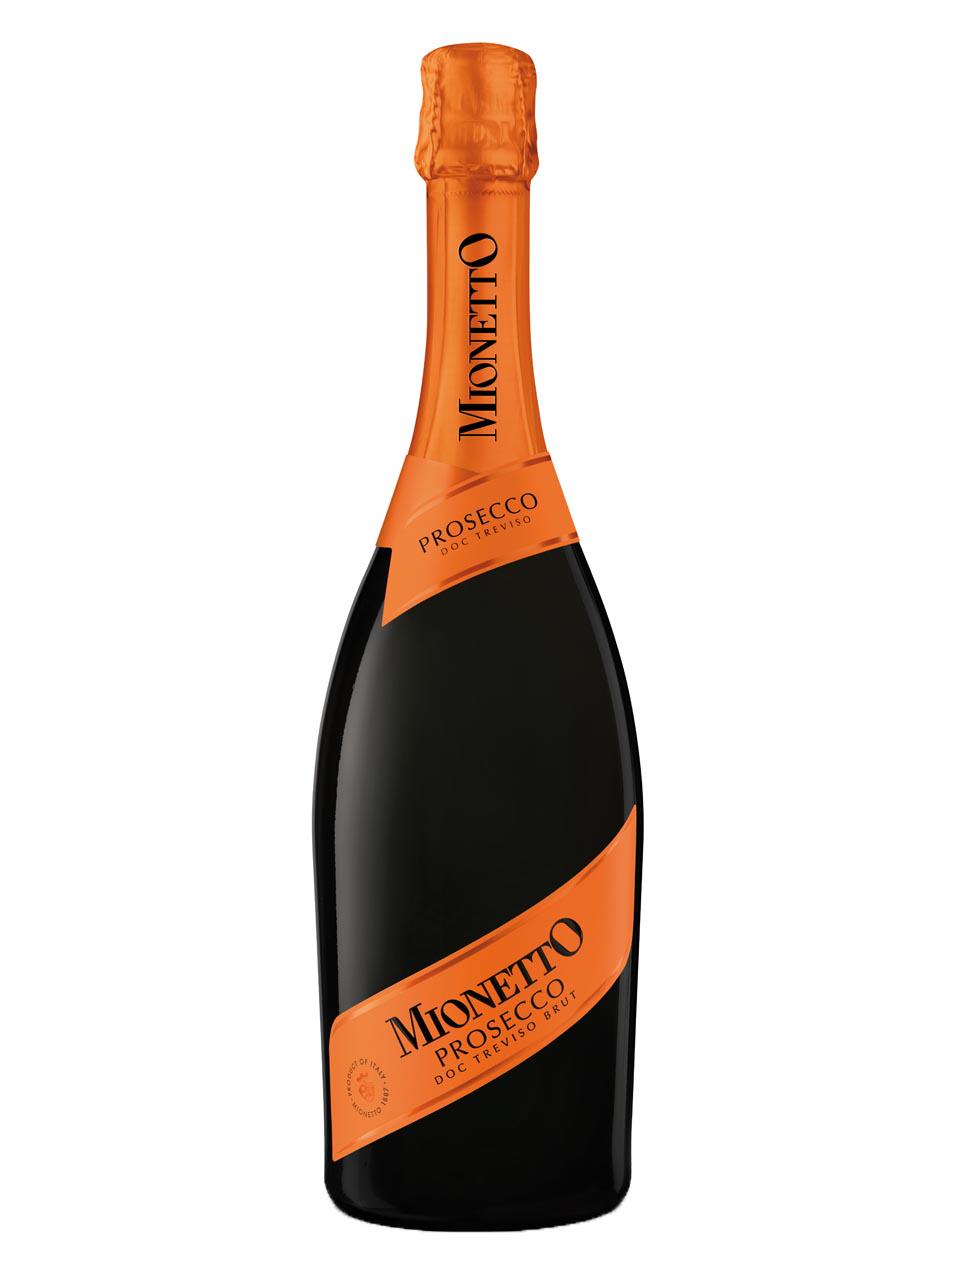 Mionetto, Prestige Collection, Prosecco, DOC Treviso, brut, weiß 0.75L |  Frankfurt Airport Online Shopping